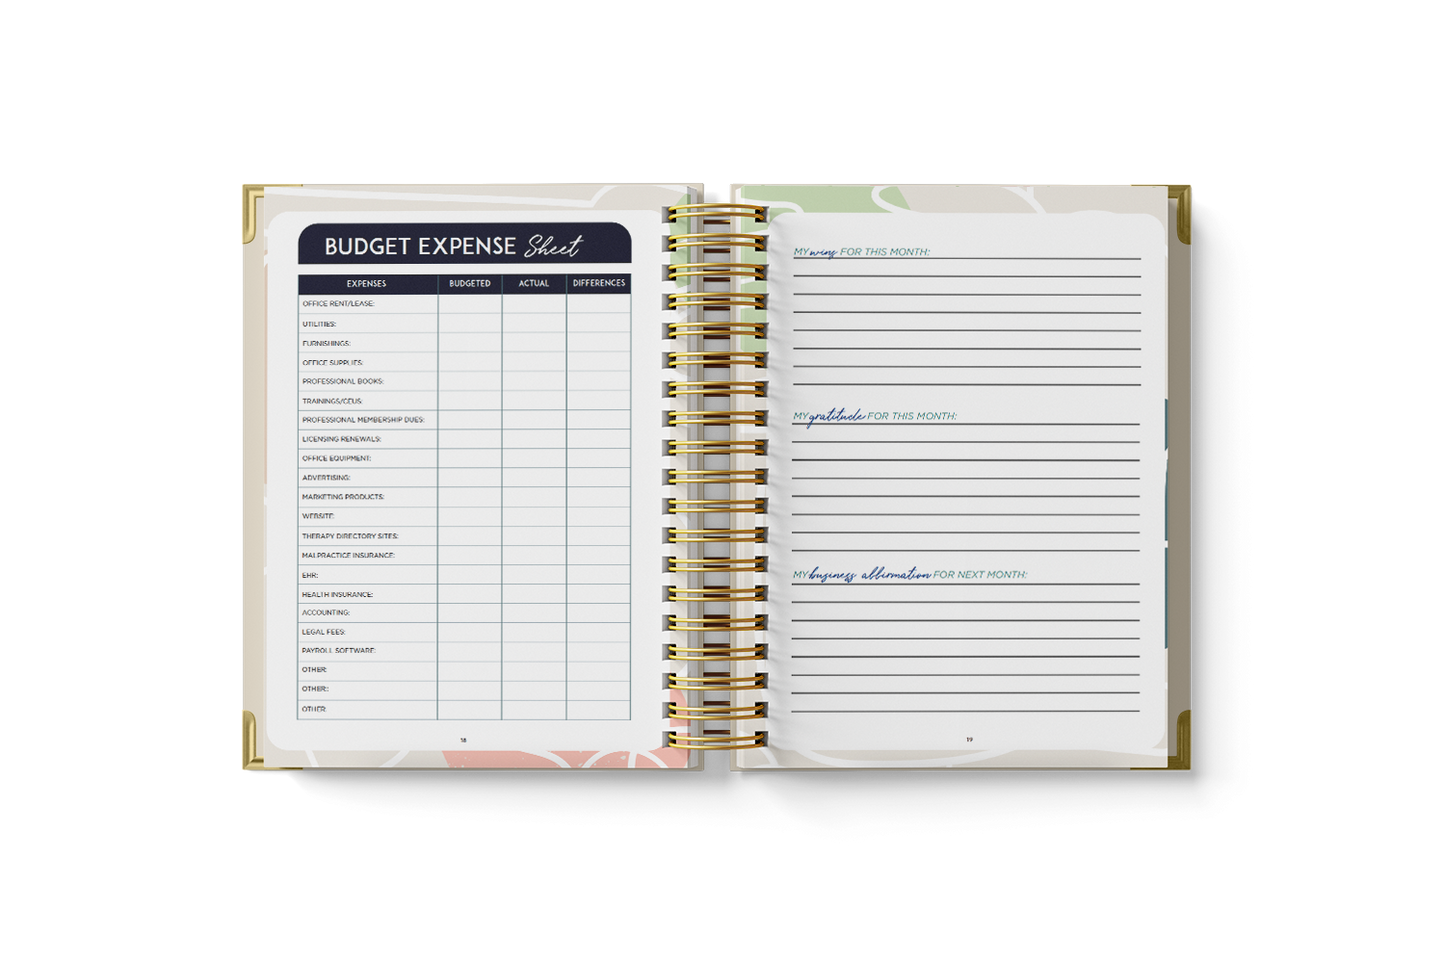 2023 Therapist Planner - White/Pink (This is a 2023, not 2024 planner)